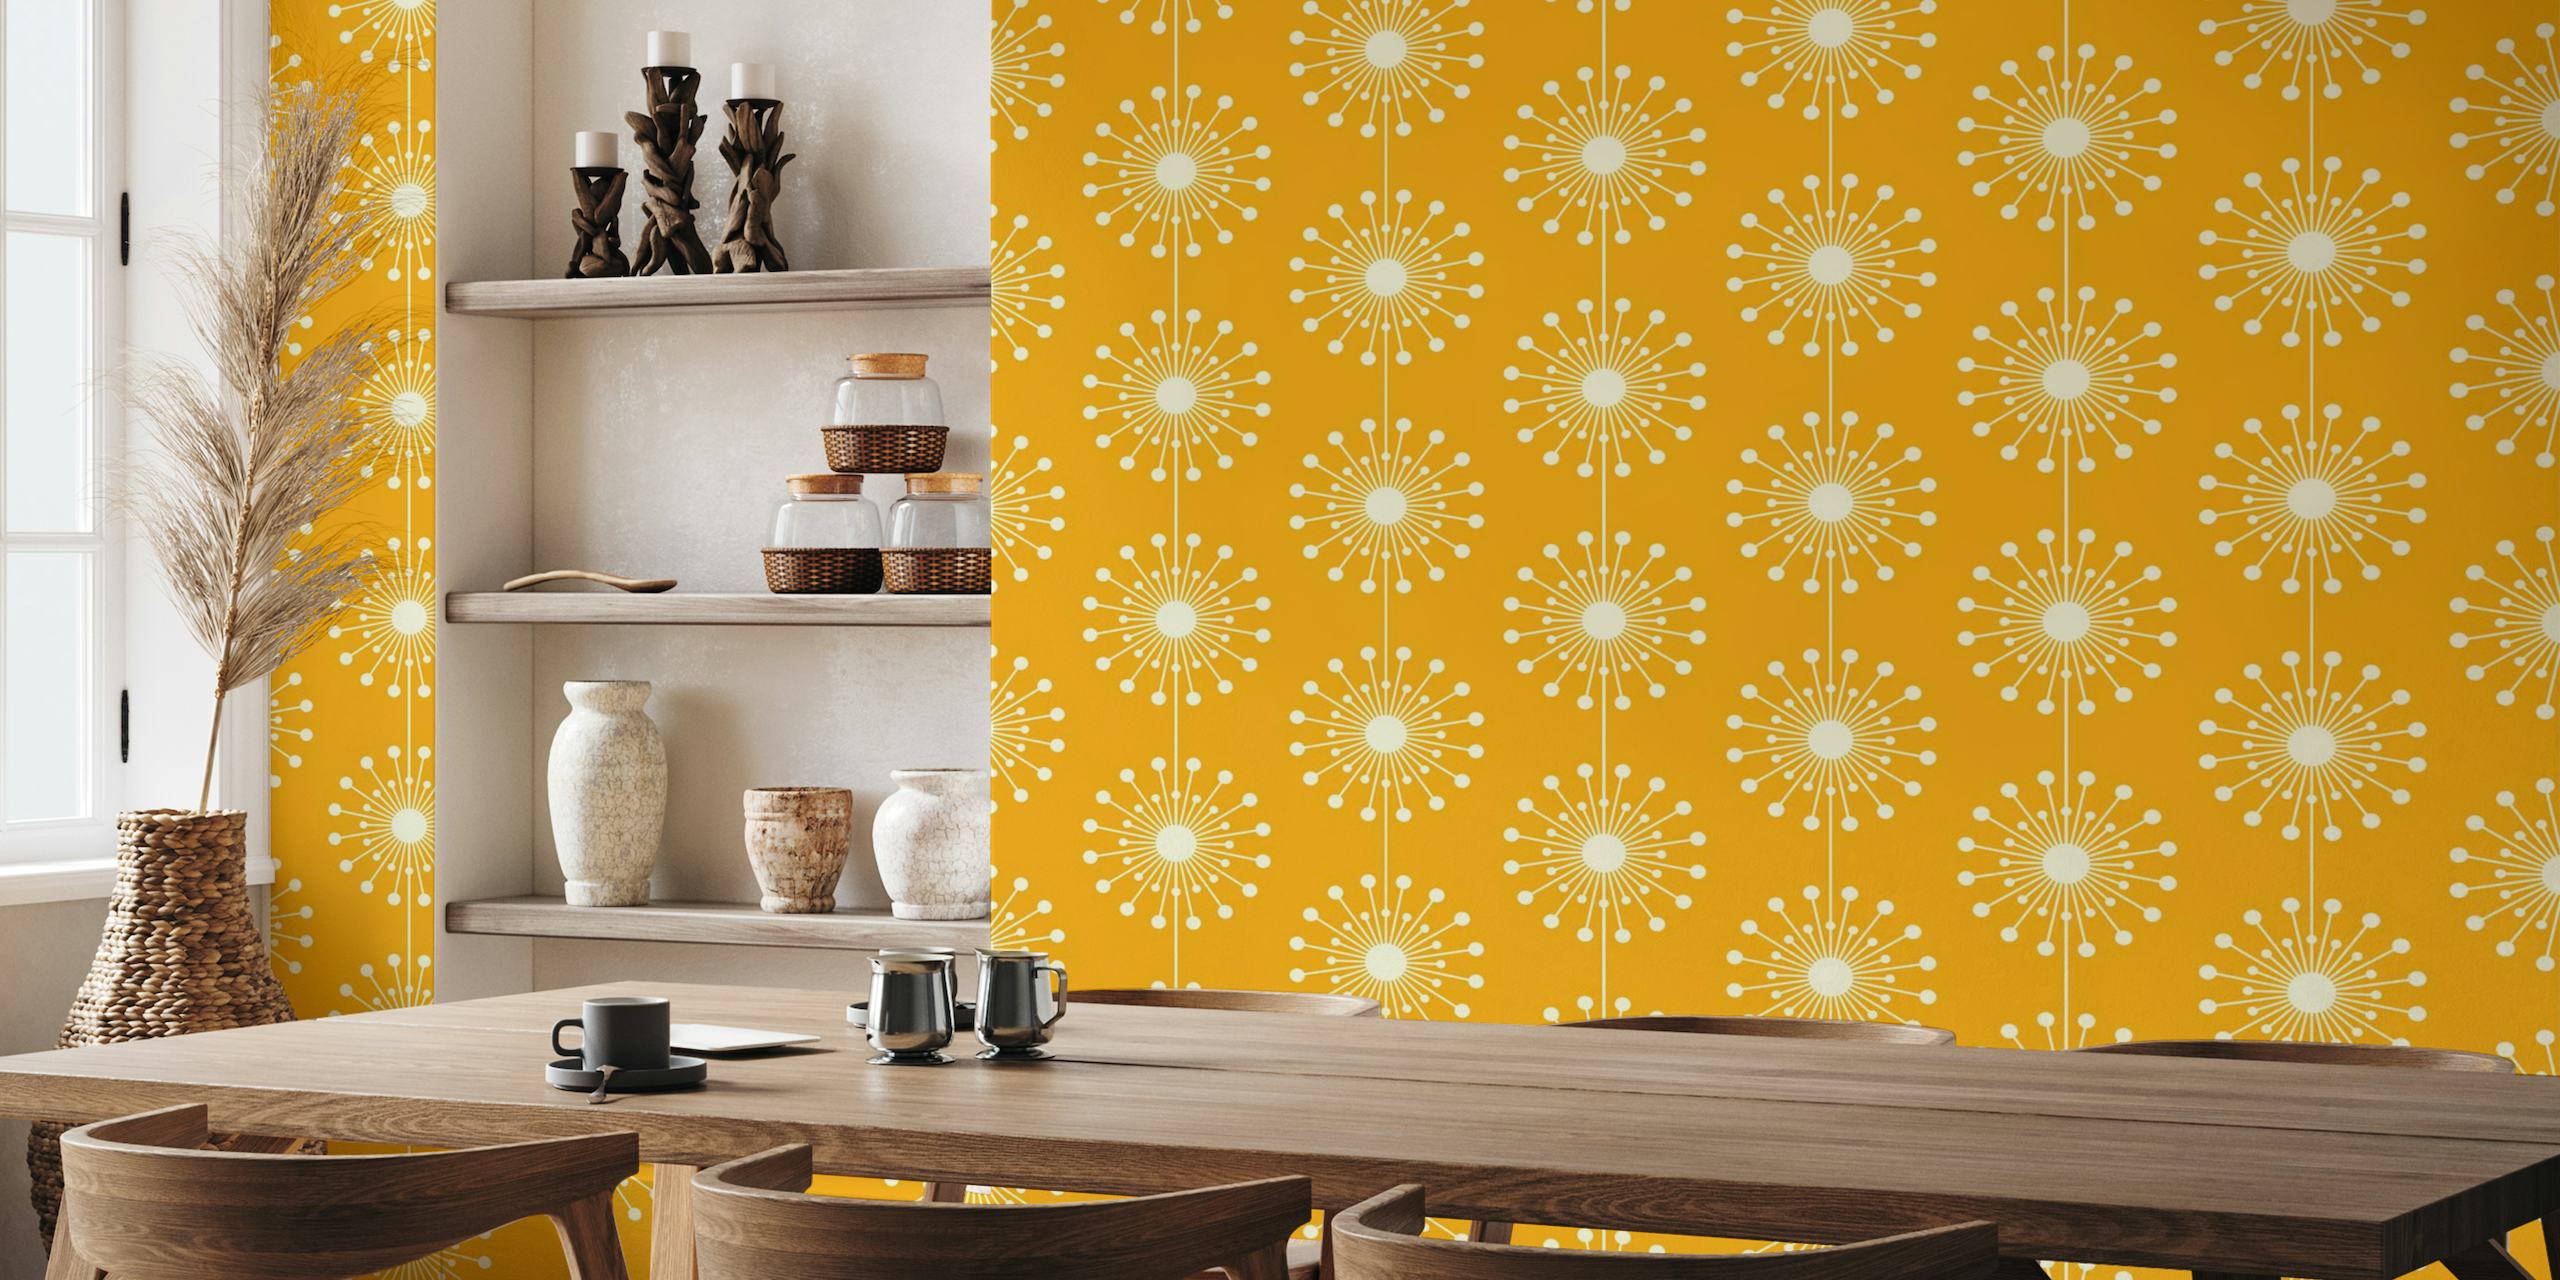 Midcentury modern dandelion pattern wall mural with a bright yellow background and white floral designs